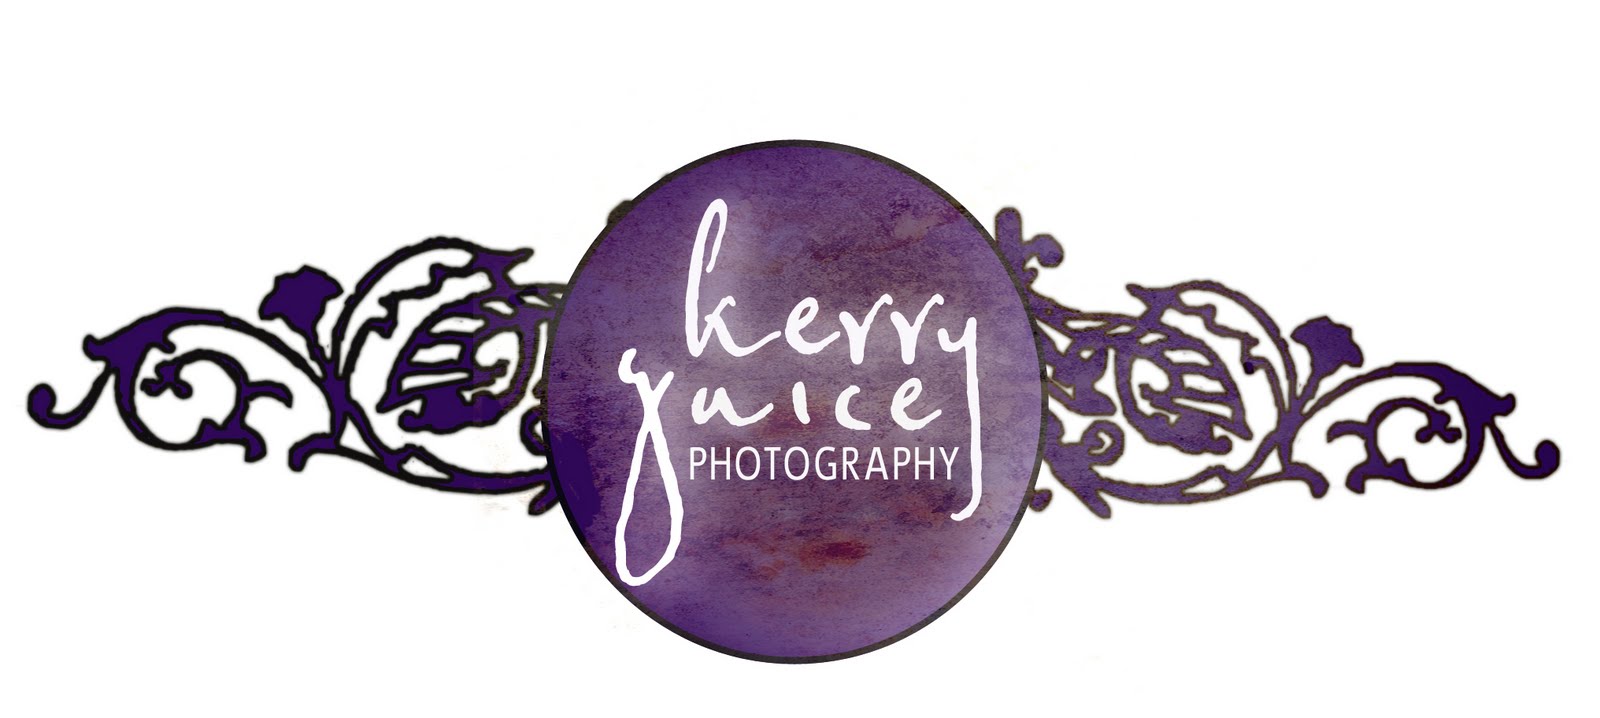 KERRY GUICE PHOTOGRAPHY